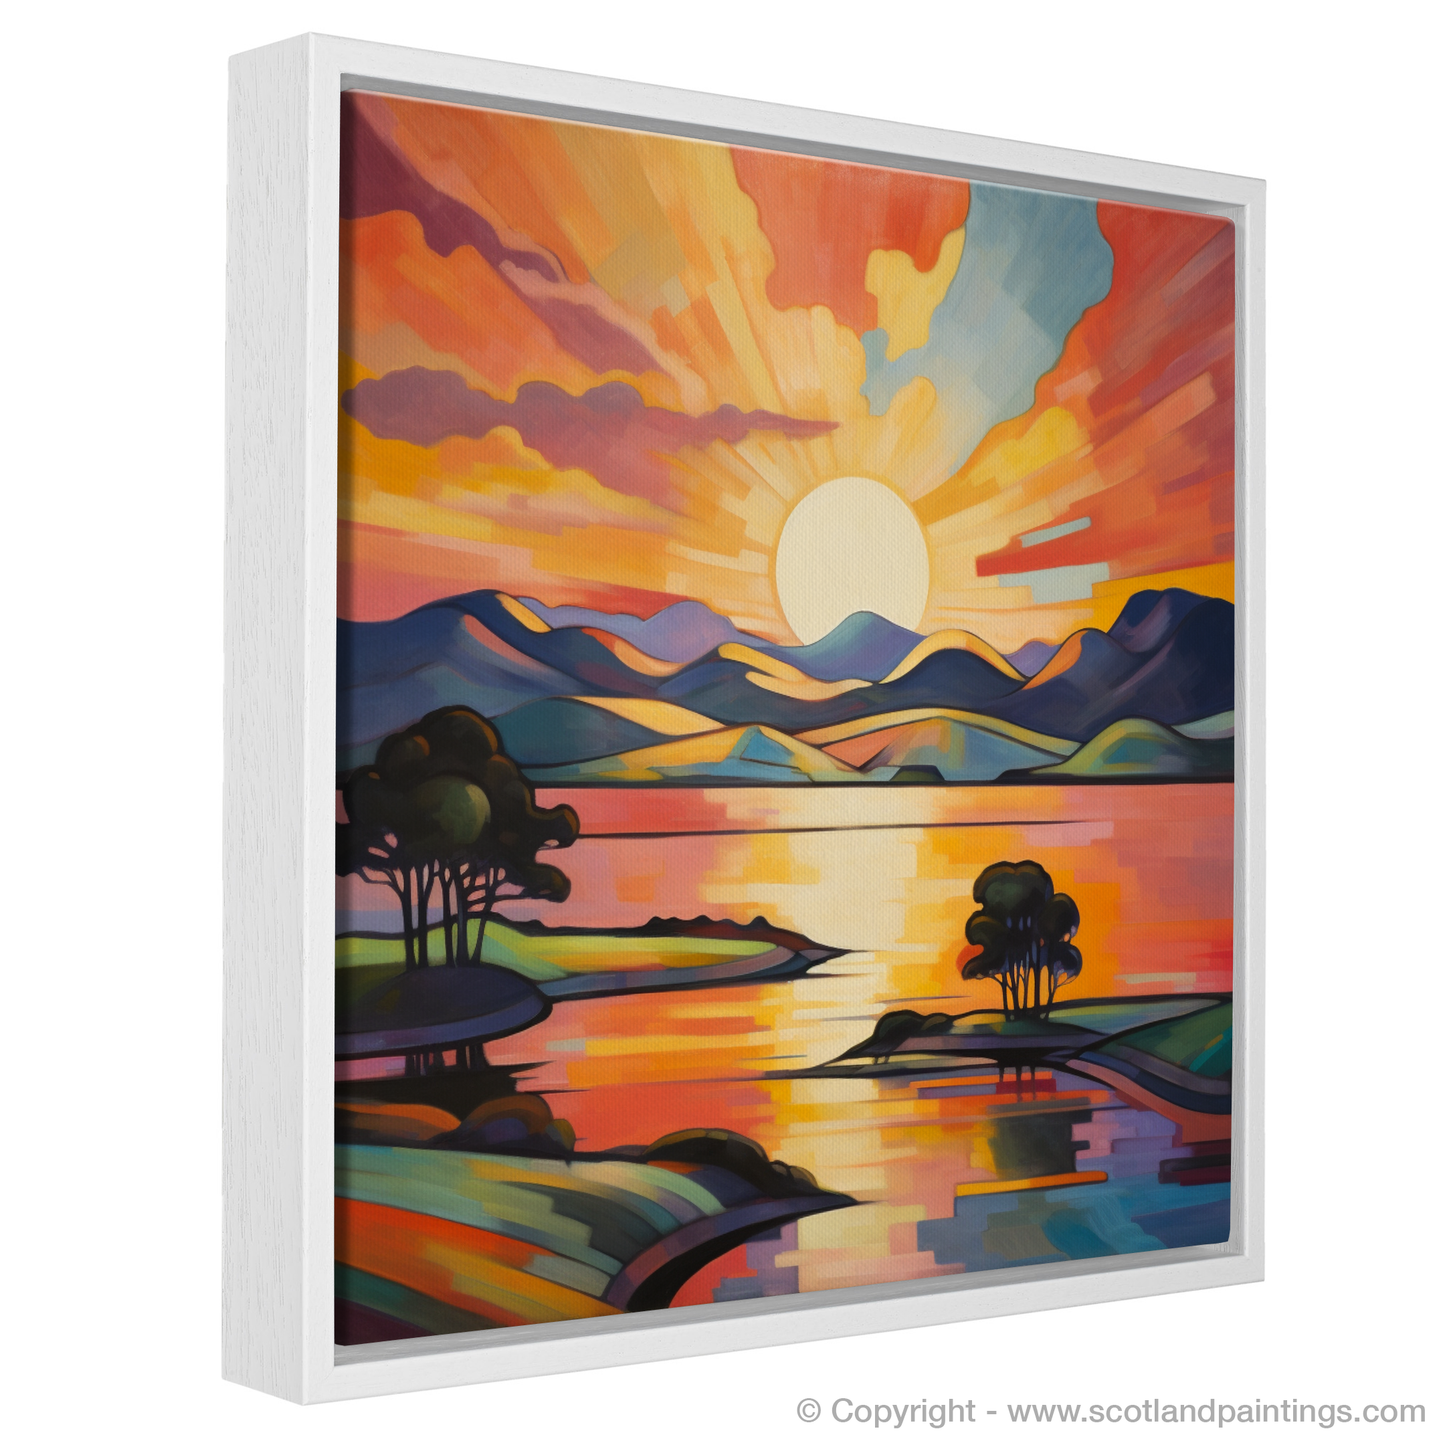 Painting and Art Print of Sunset over Loch Lomond entitled "Cubist Sunset over Loch Lomond".